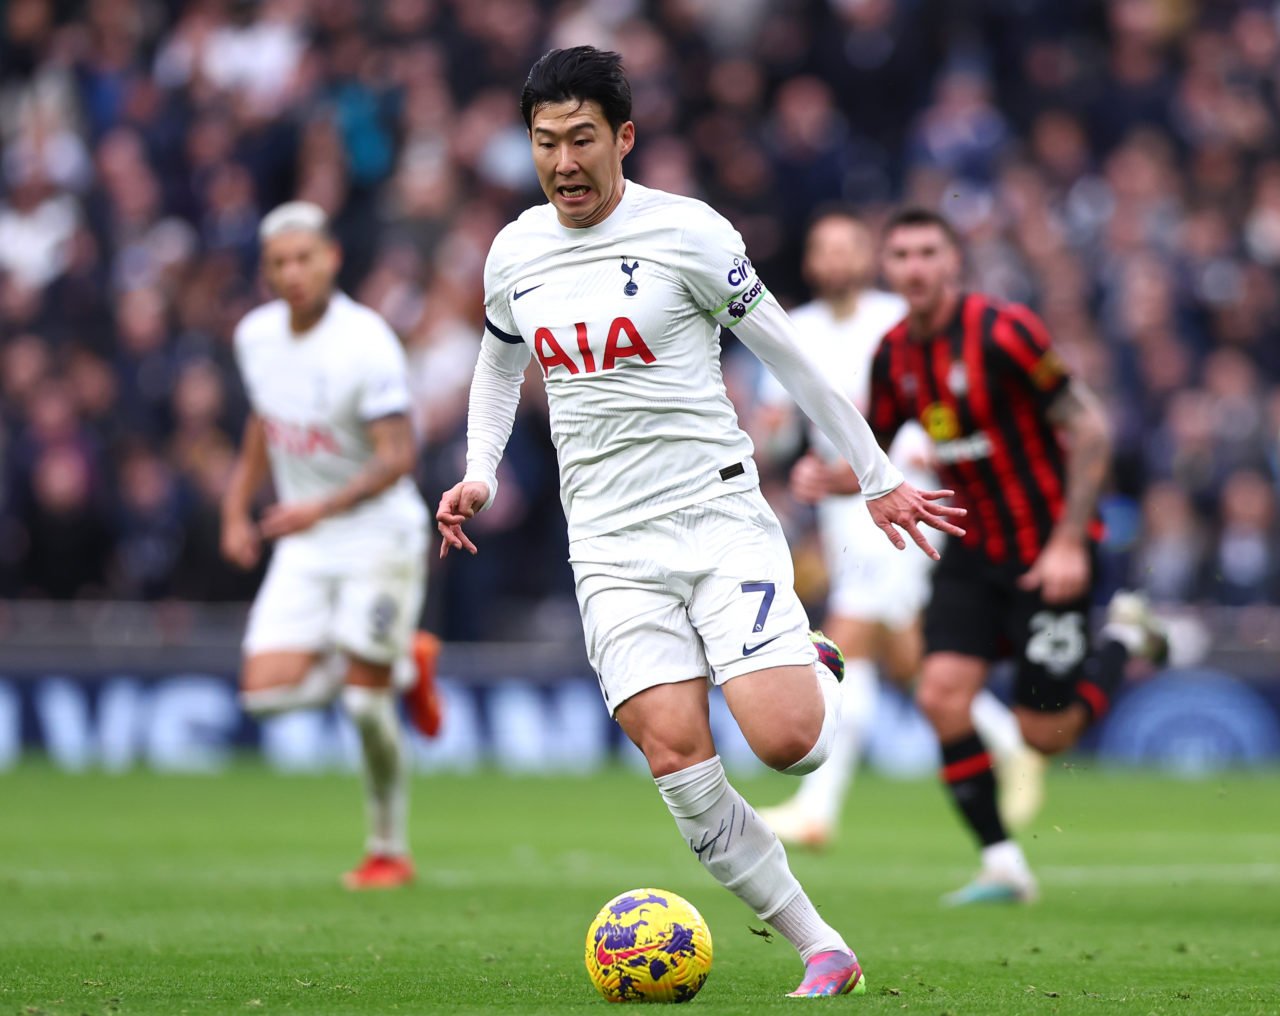 Spurs half time ratings vs Bournemouth - Sarr scores then goes off injured